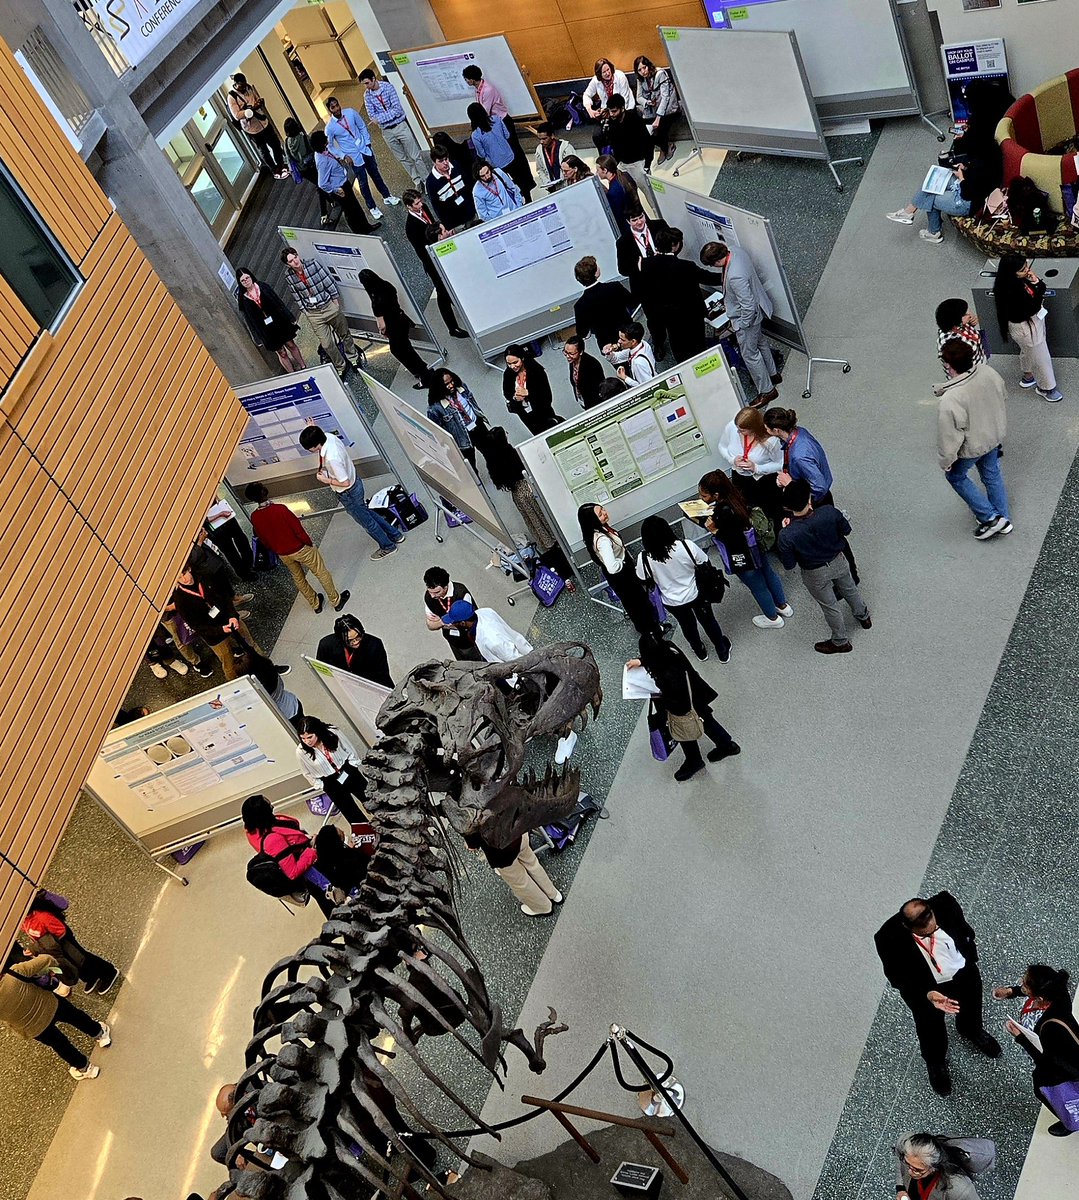 Where else can there be a poster session under the watchful eye of Stan, the T. rex?!!
#MCSC #MCSC2024 #MDCCs #trex @montgomerycoll
@MCBioRckvl 
@mc_rockville 
#undergraduateresearch